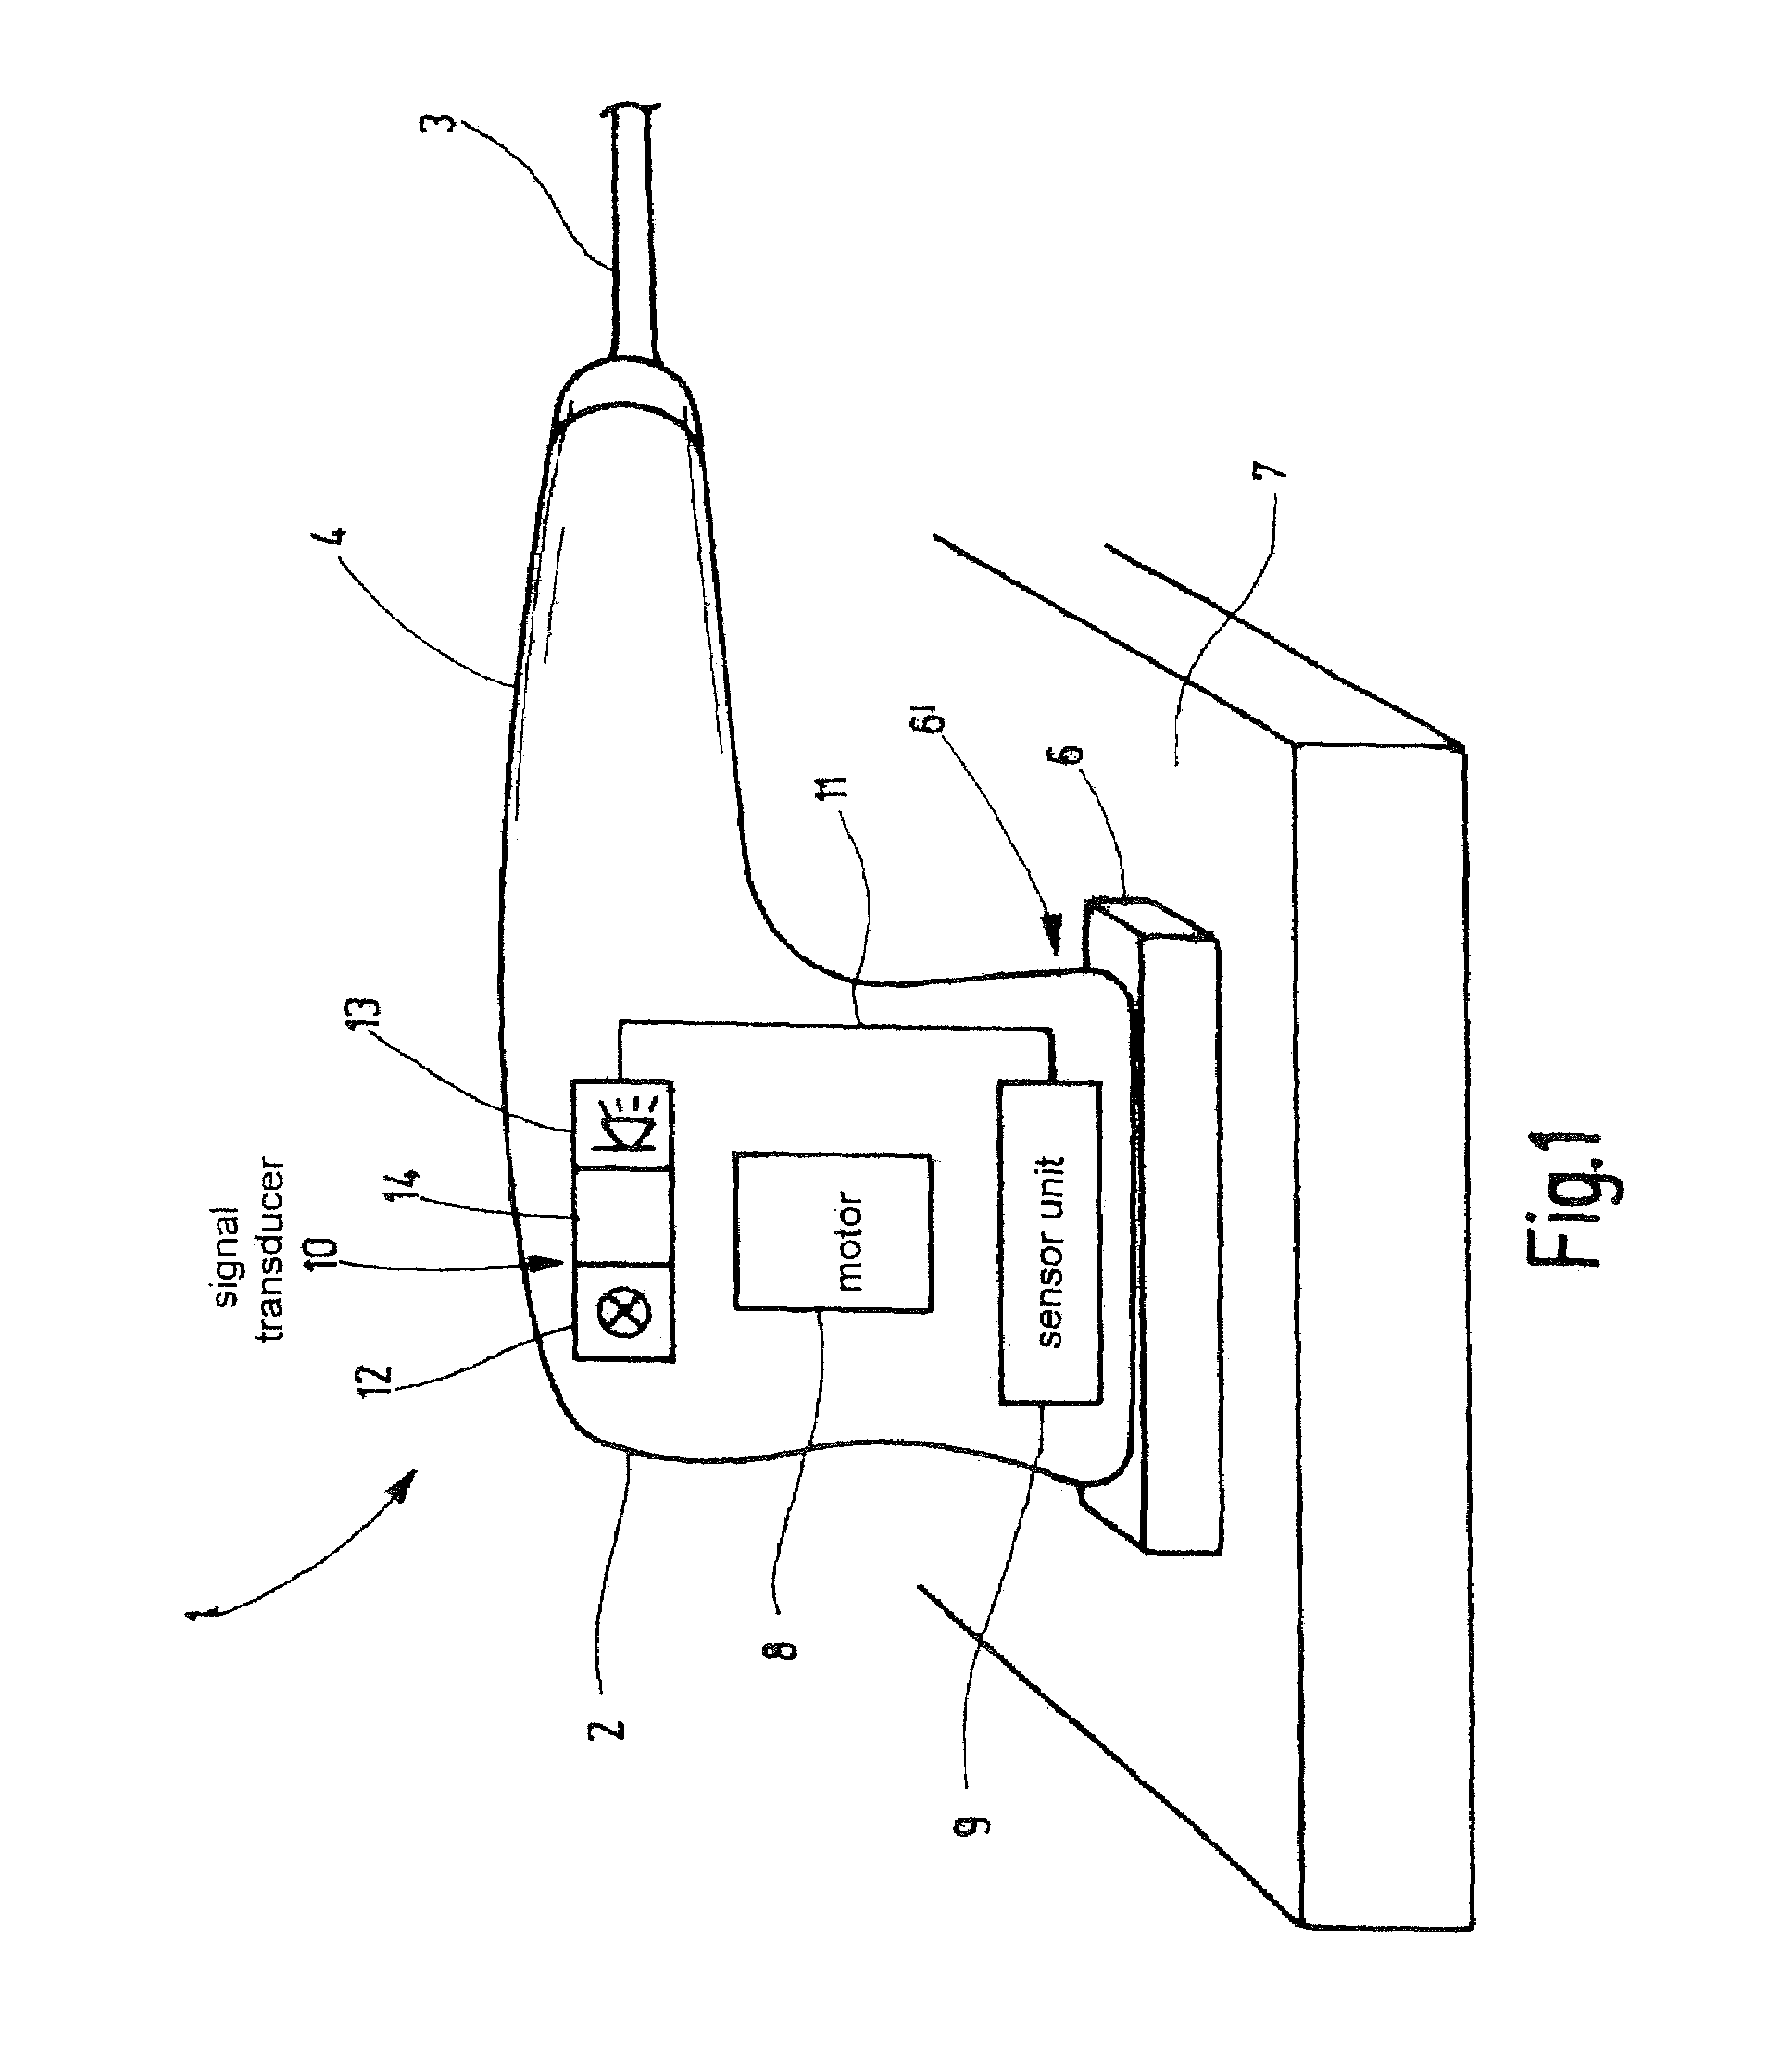 Electric power tool with optimized operating range